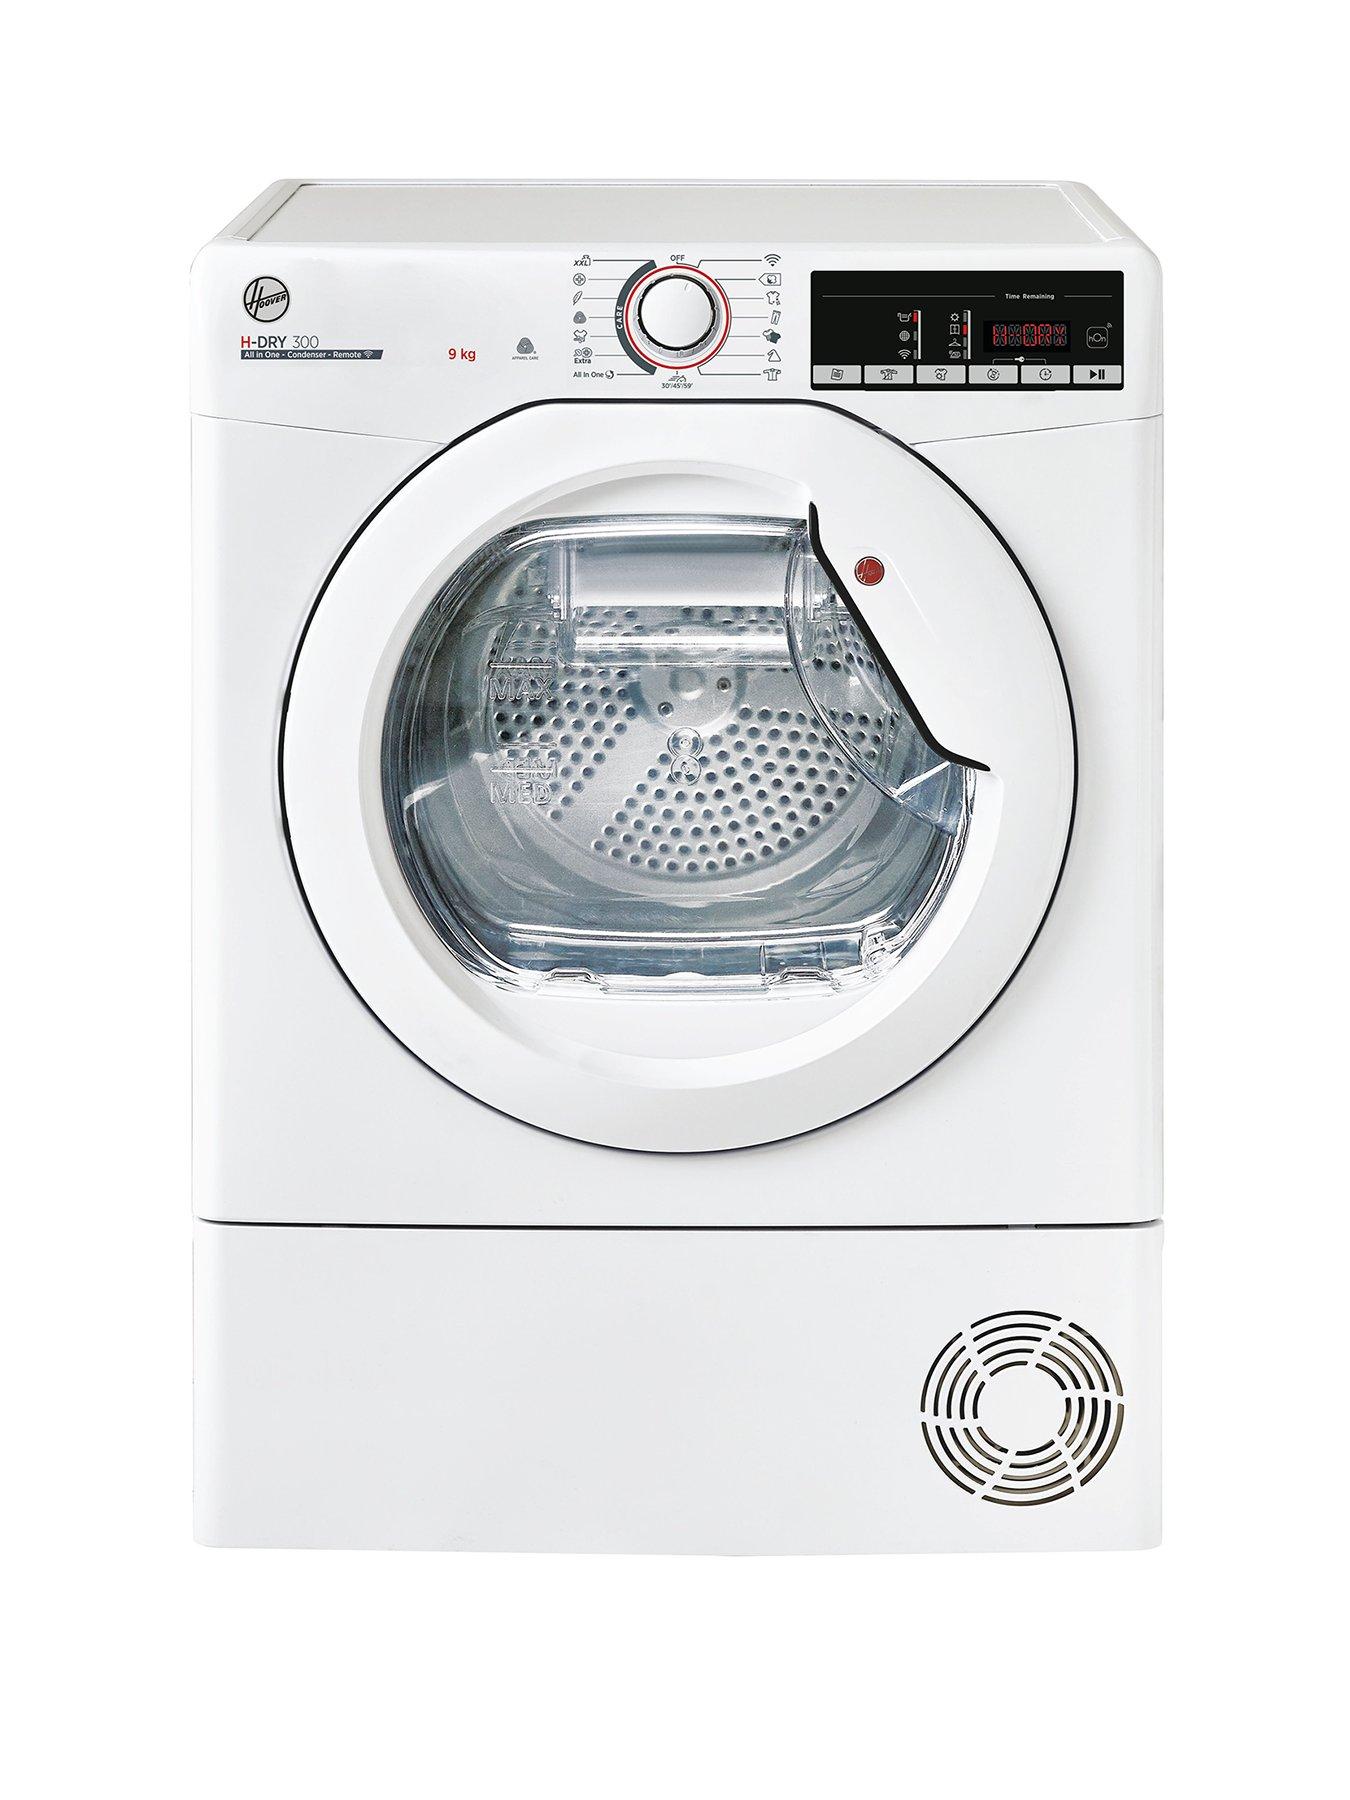 Hoover H-Dry 300 Hle C9Tce 9Kg Condenser Tumble Dryer - White